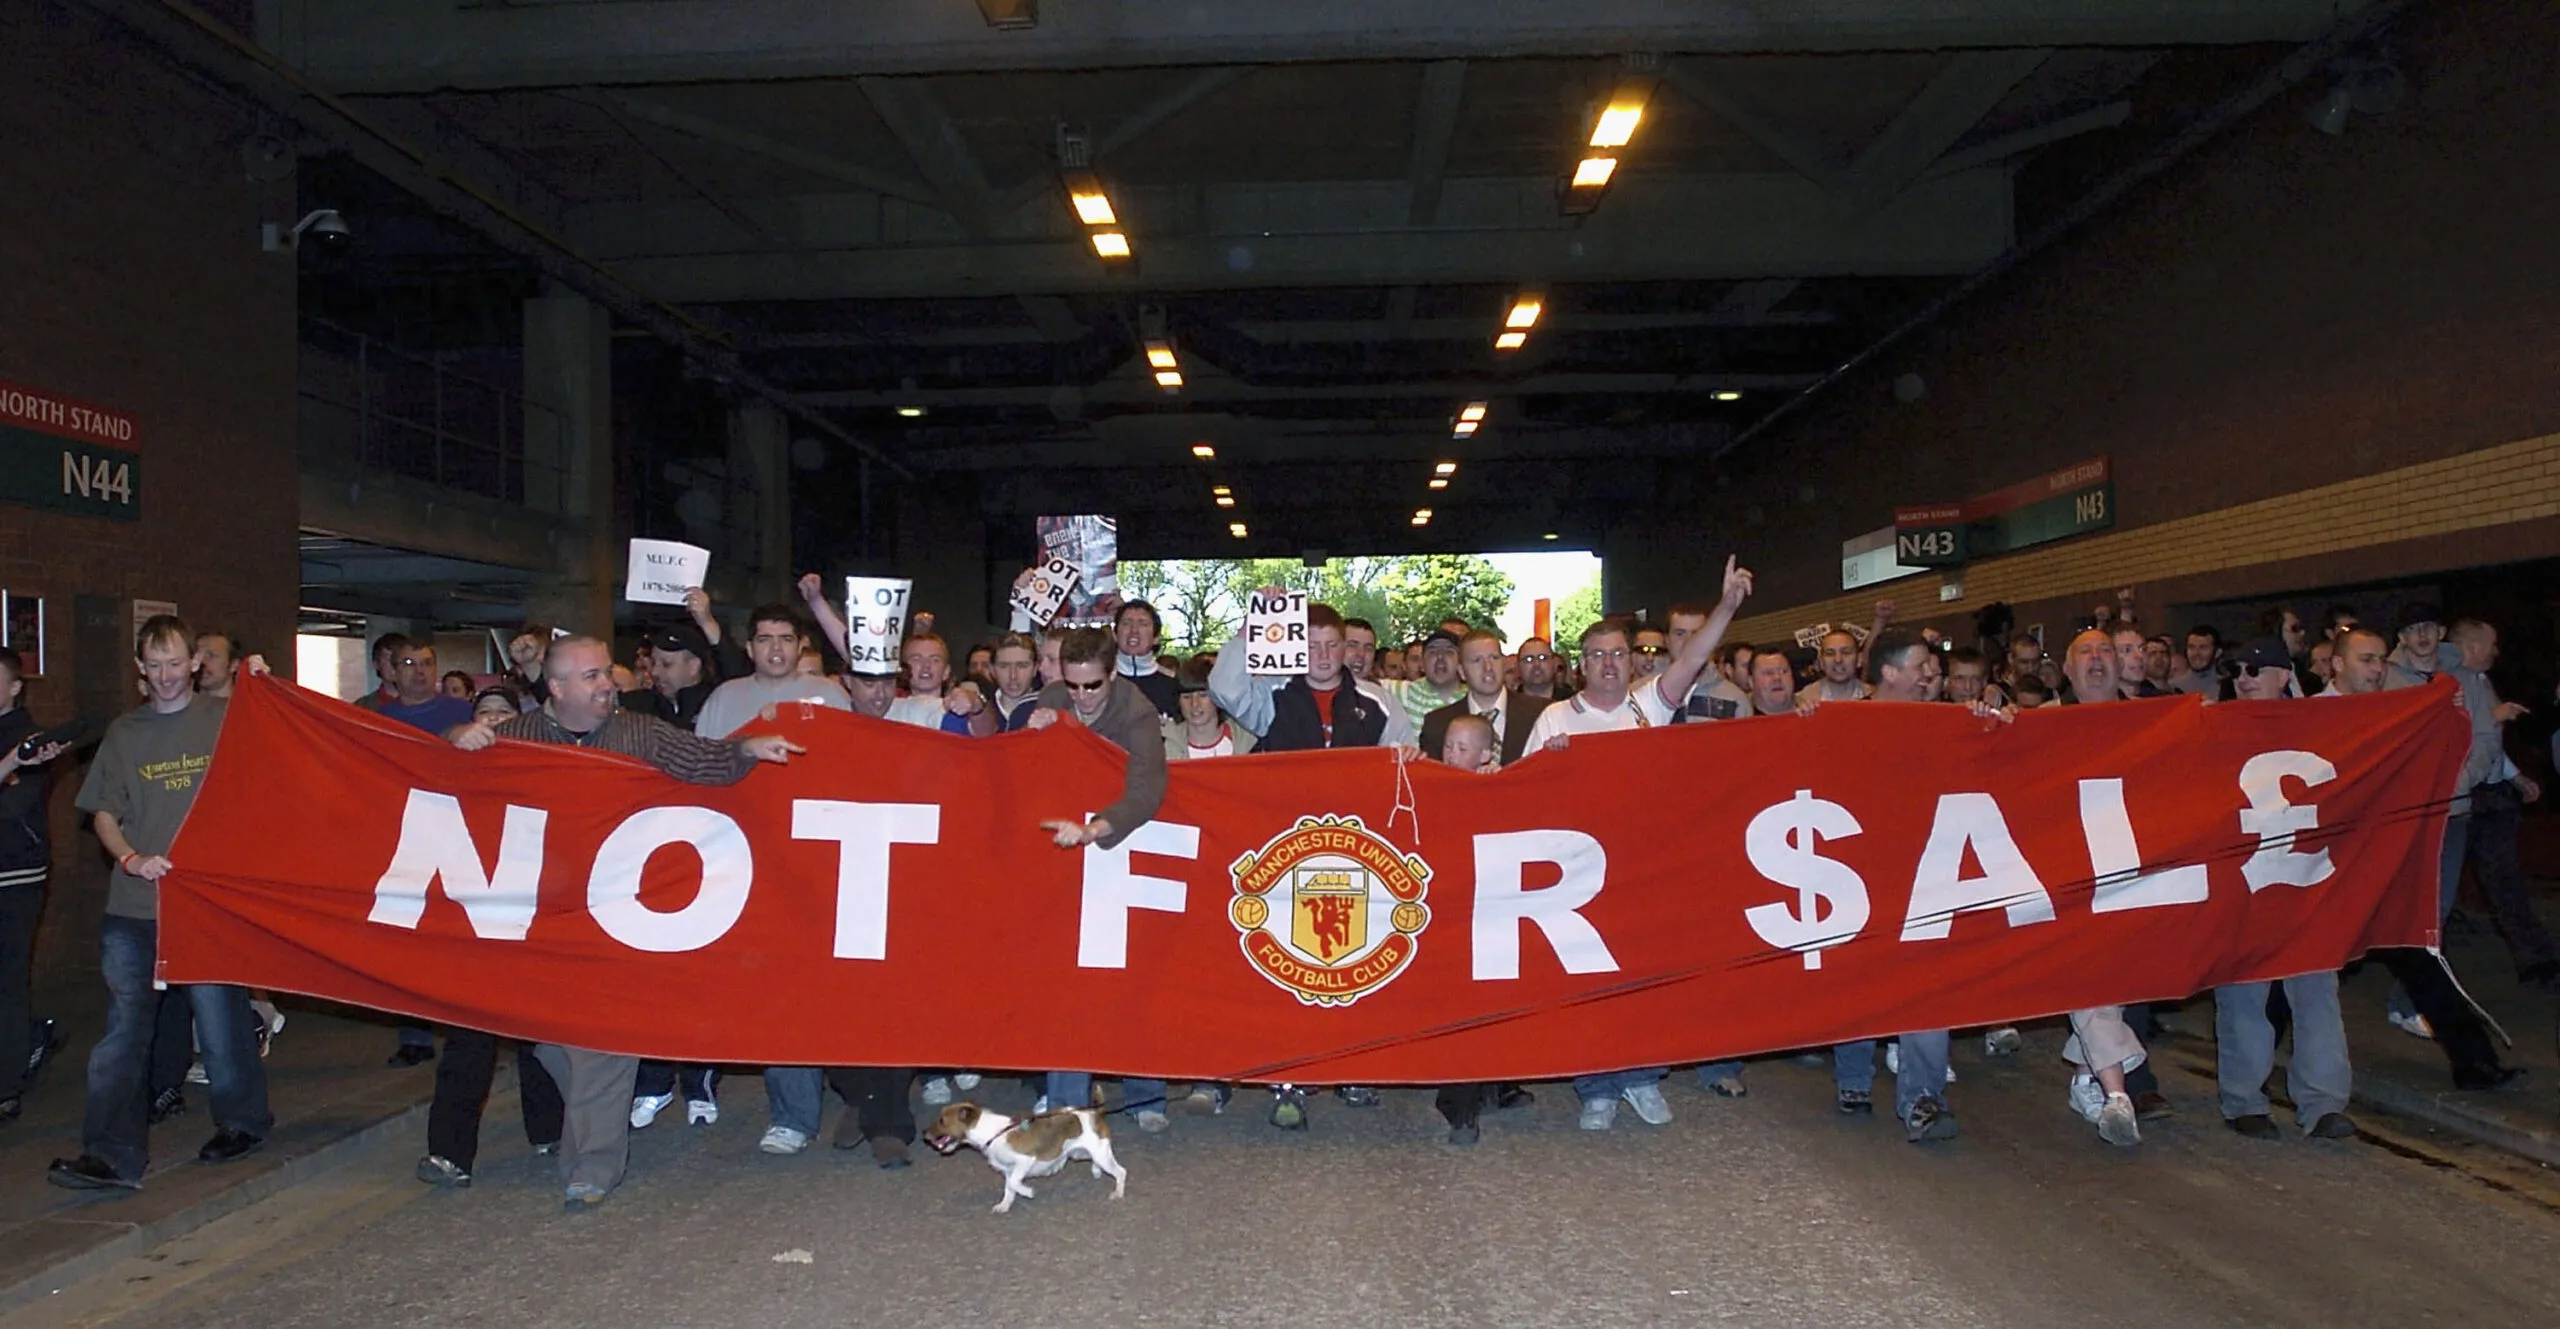 Manchester United fans seen in protest of the sale of their beloved soccer club